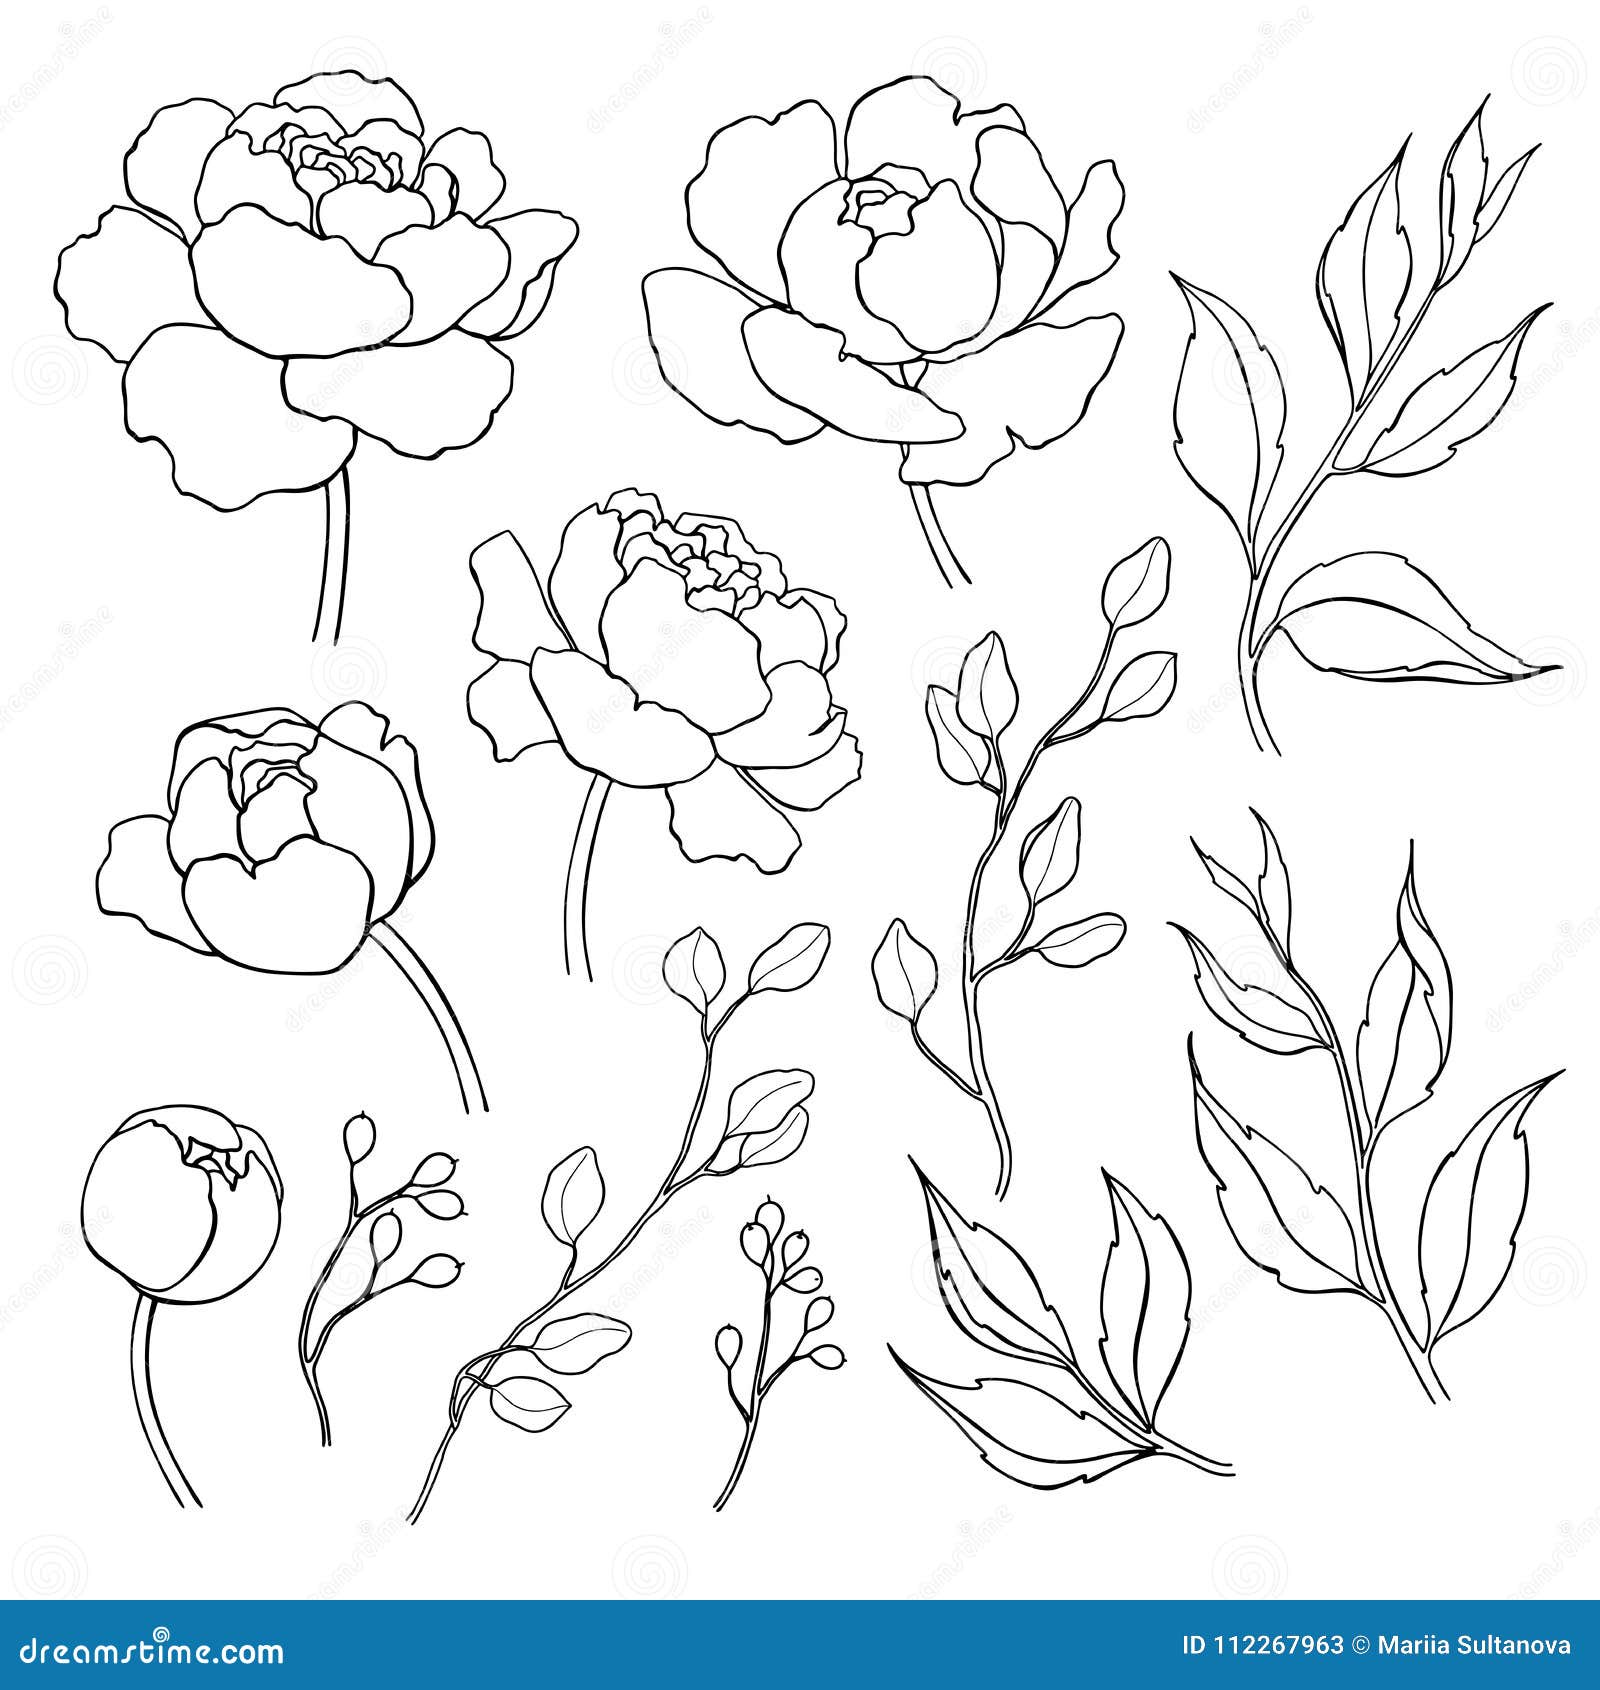 peony flower and leaves line drawing.  hand drawn outline